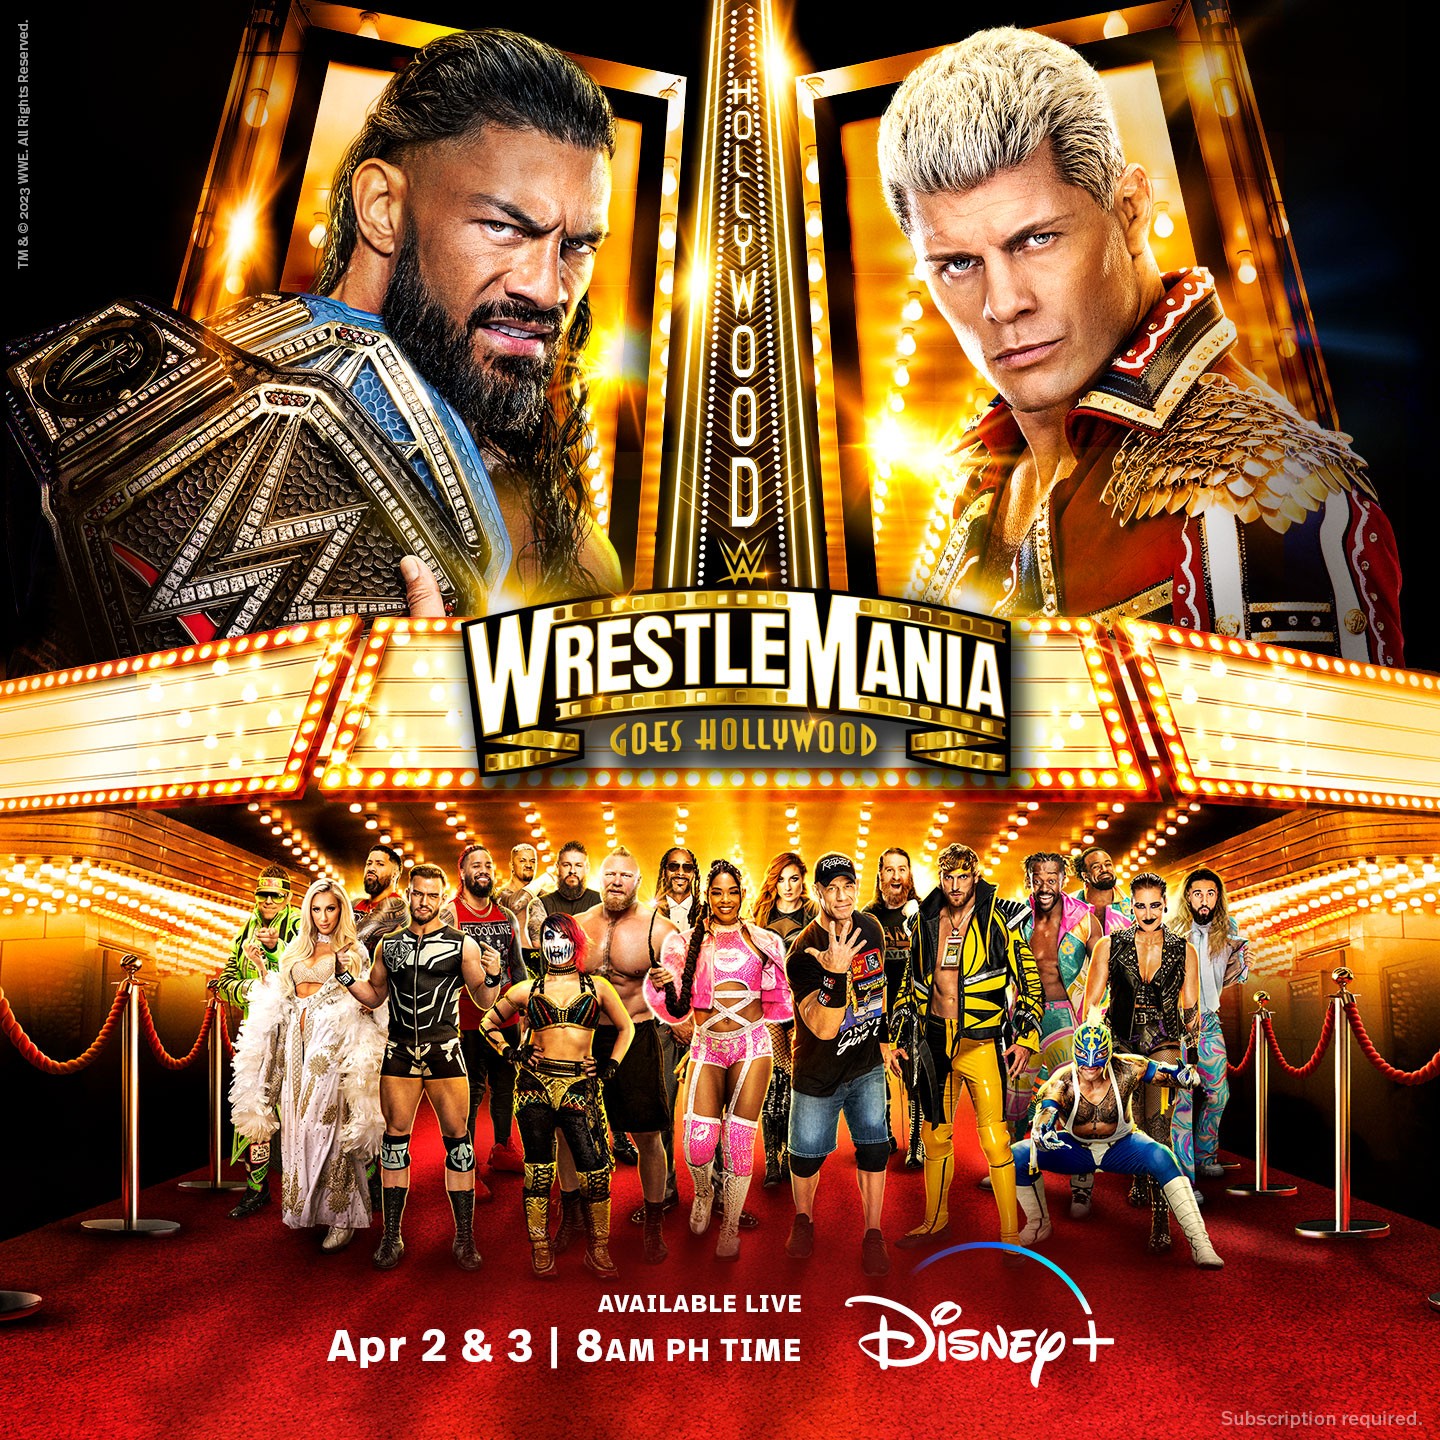 Wrestlemania 39 will stream live in the Philippines on Disney+